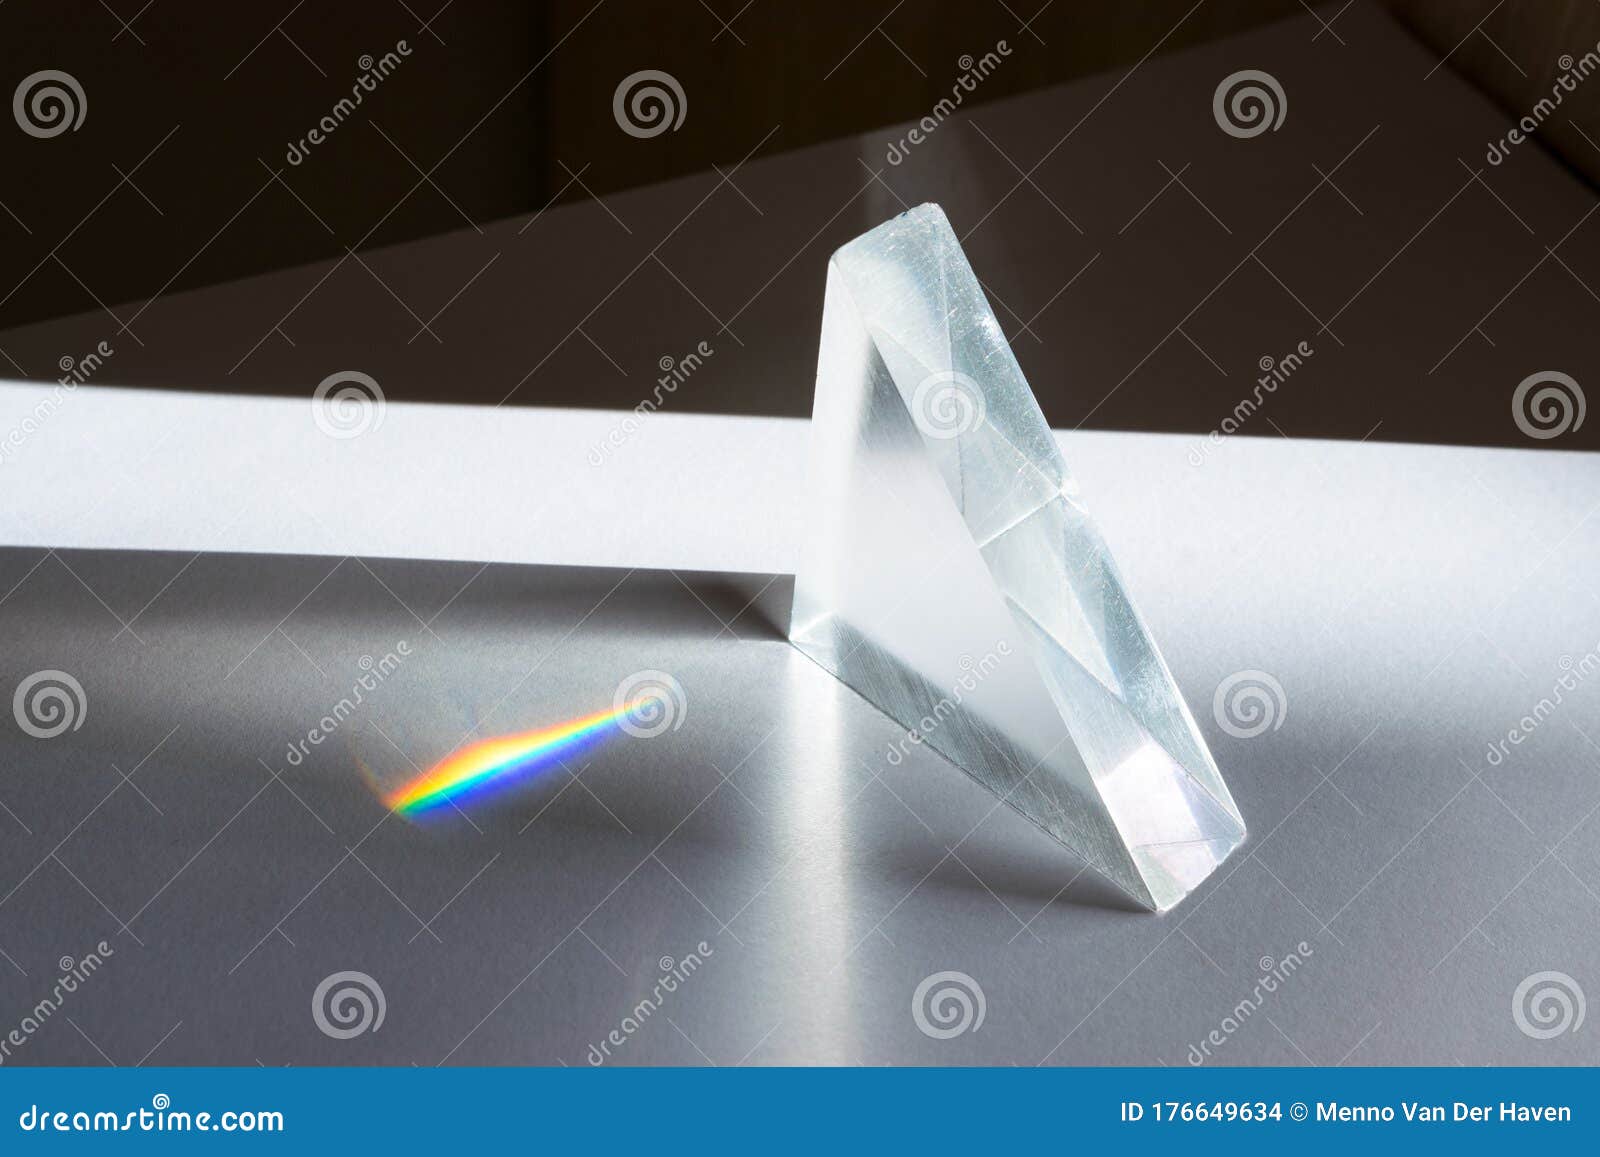 sunlight passes through a prism, creating a spectrum of colors